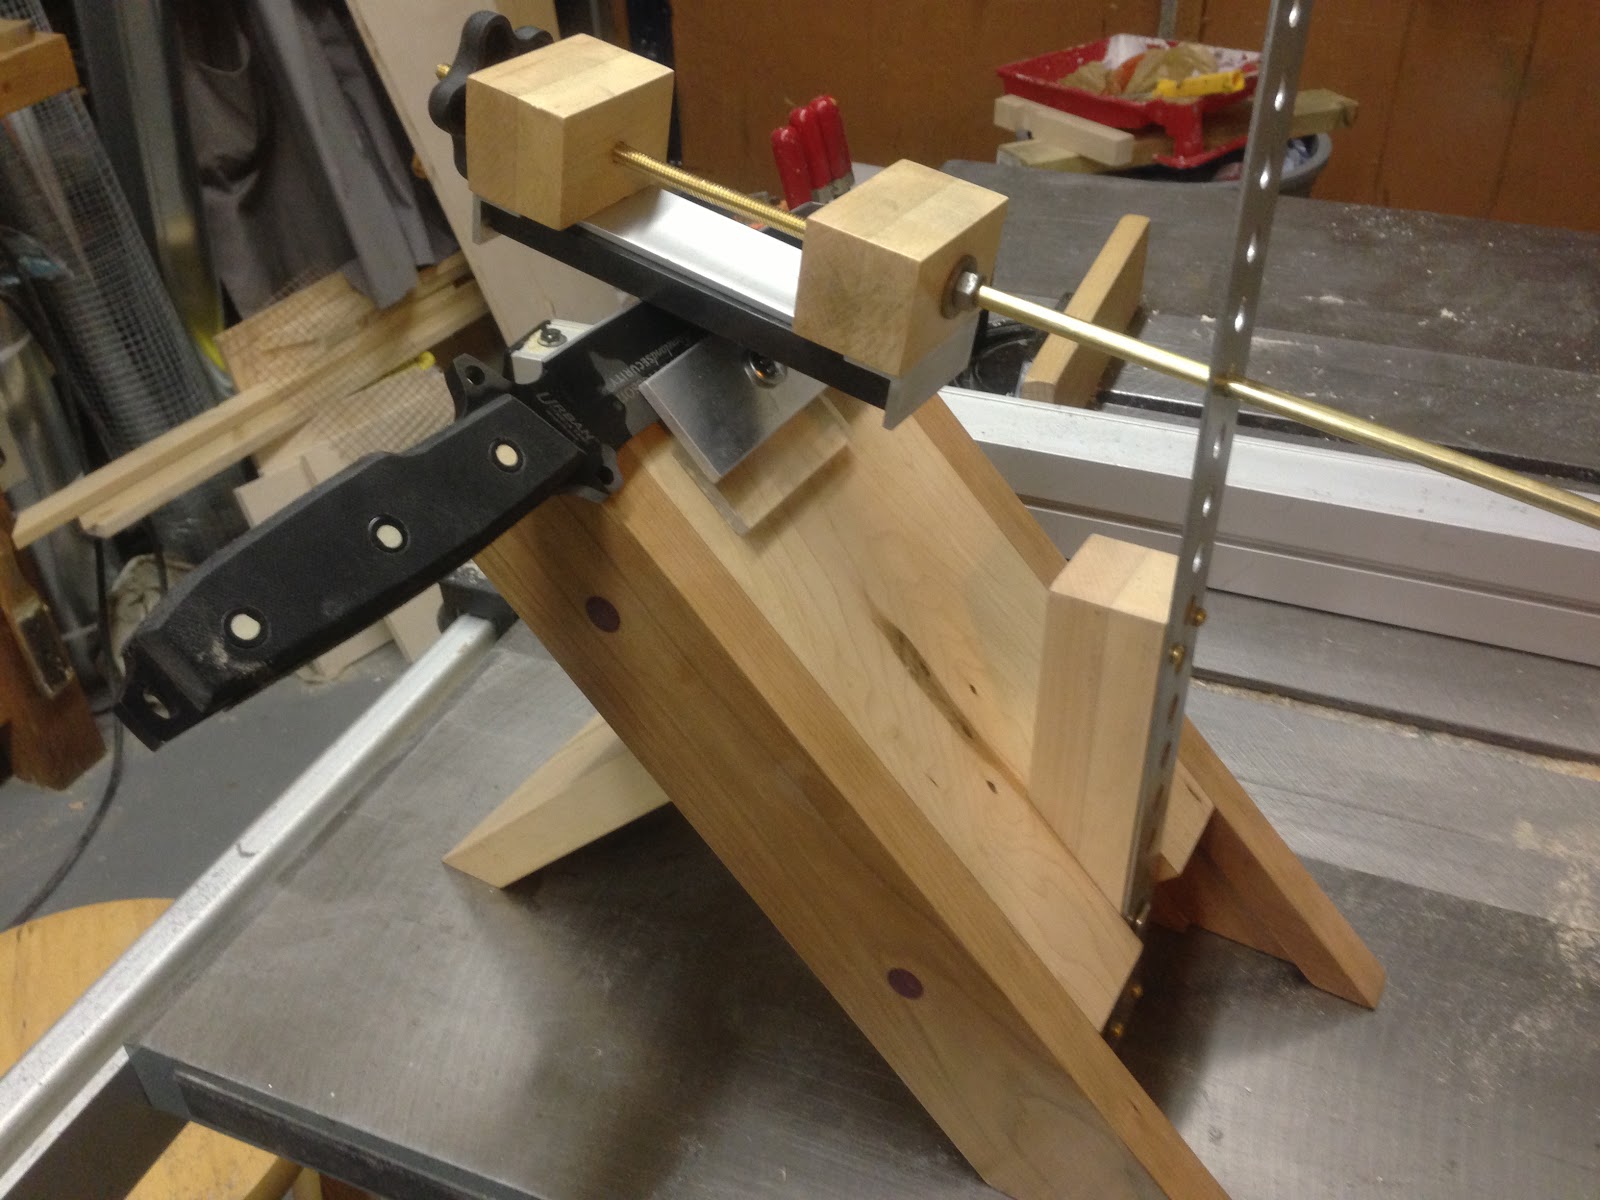 Bruster's Blog: MY LATEST PROJECT - KNIFE SHARPENING JIG